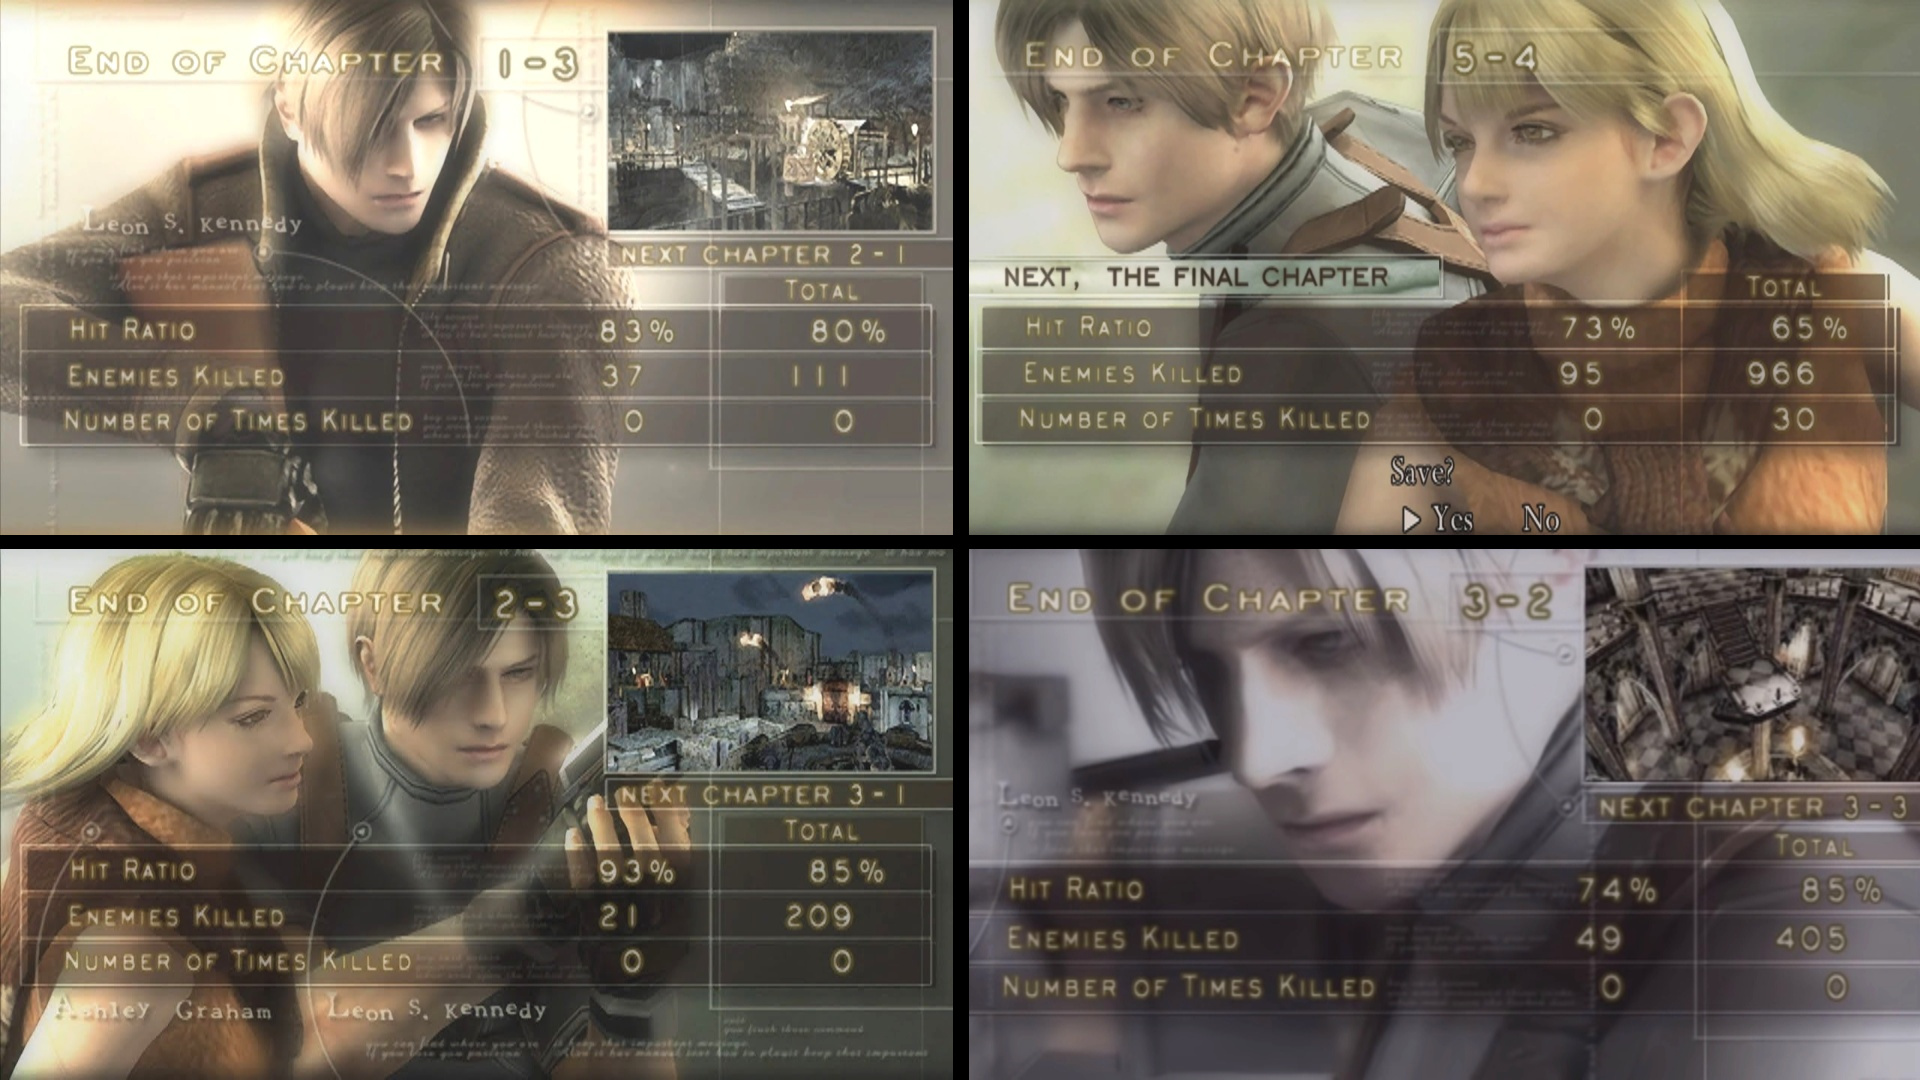 I really love the background used in RE4's chapter end screens